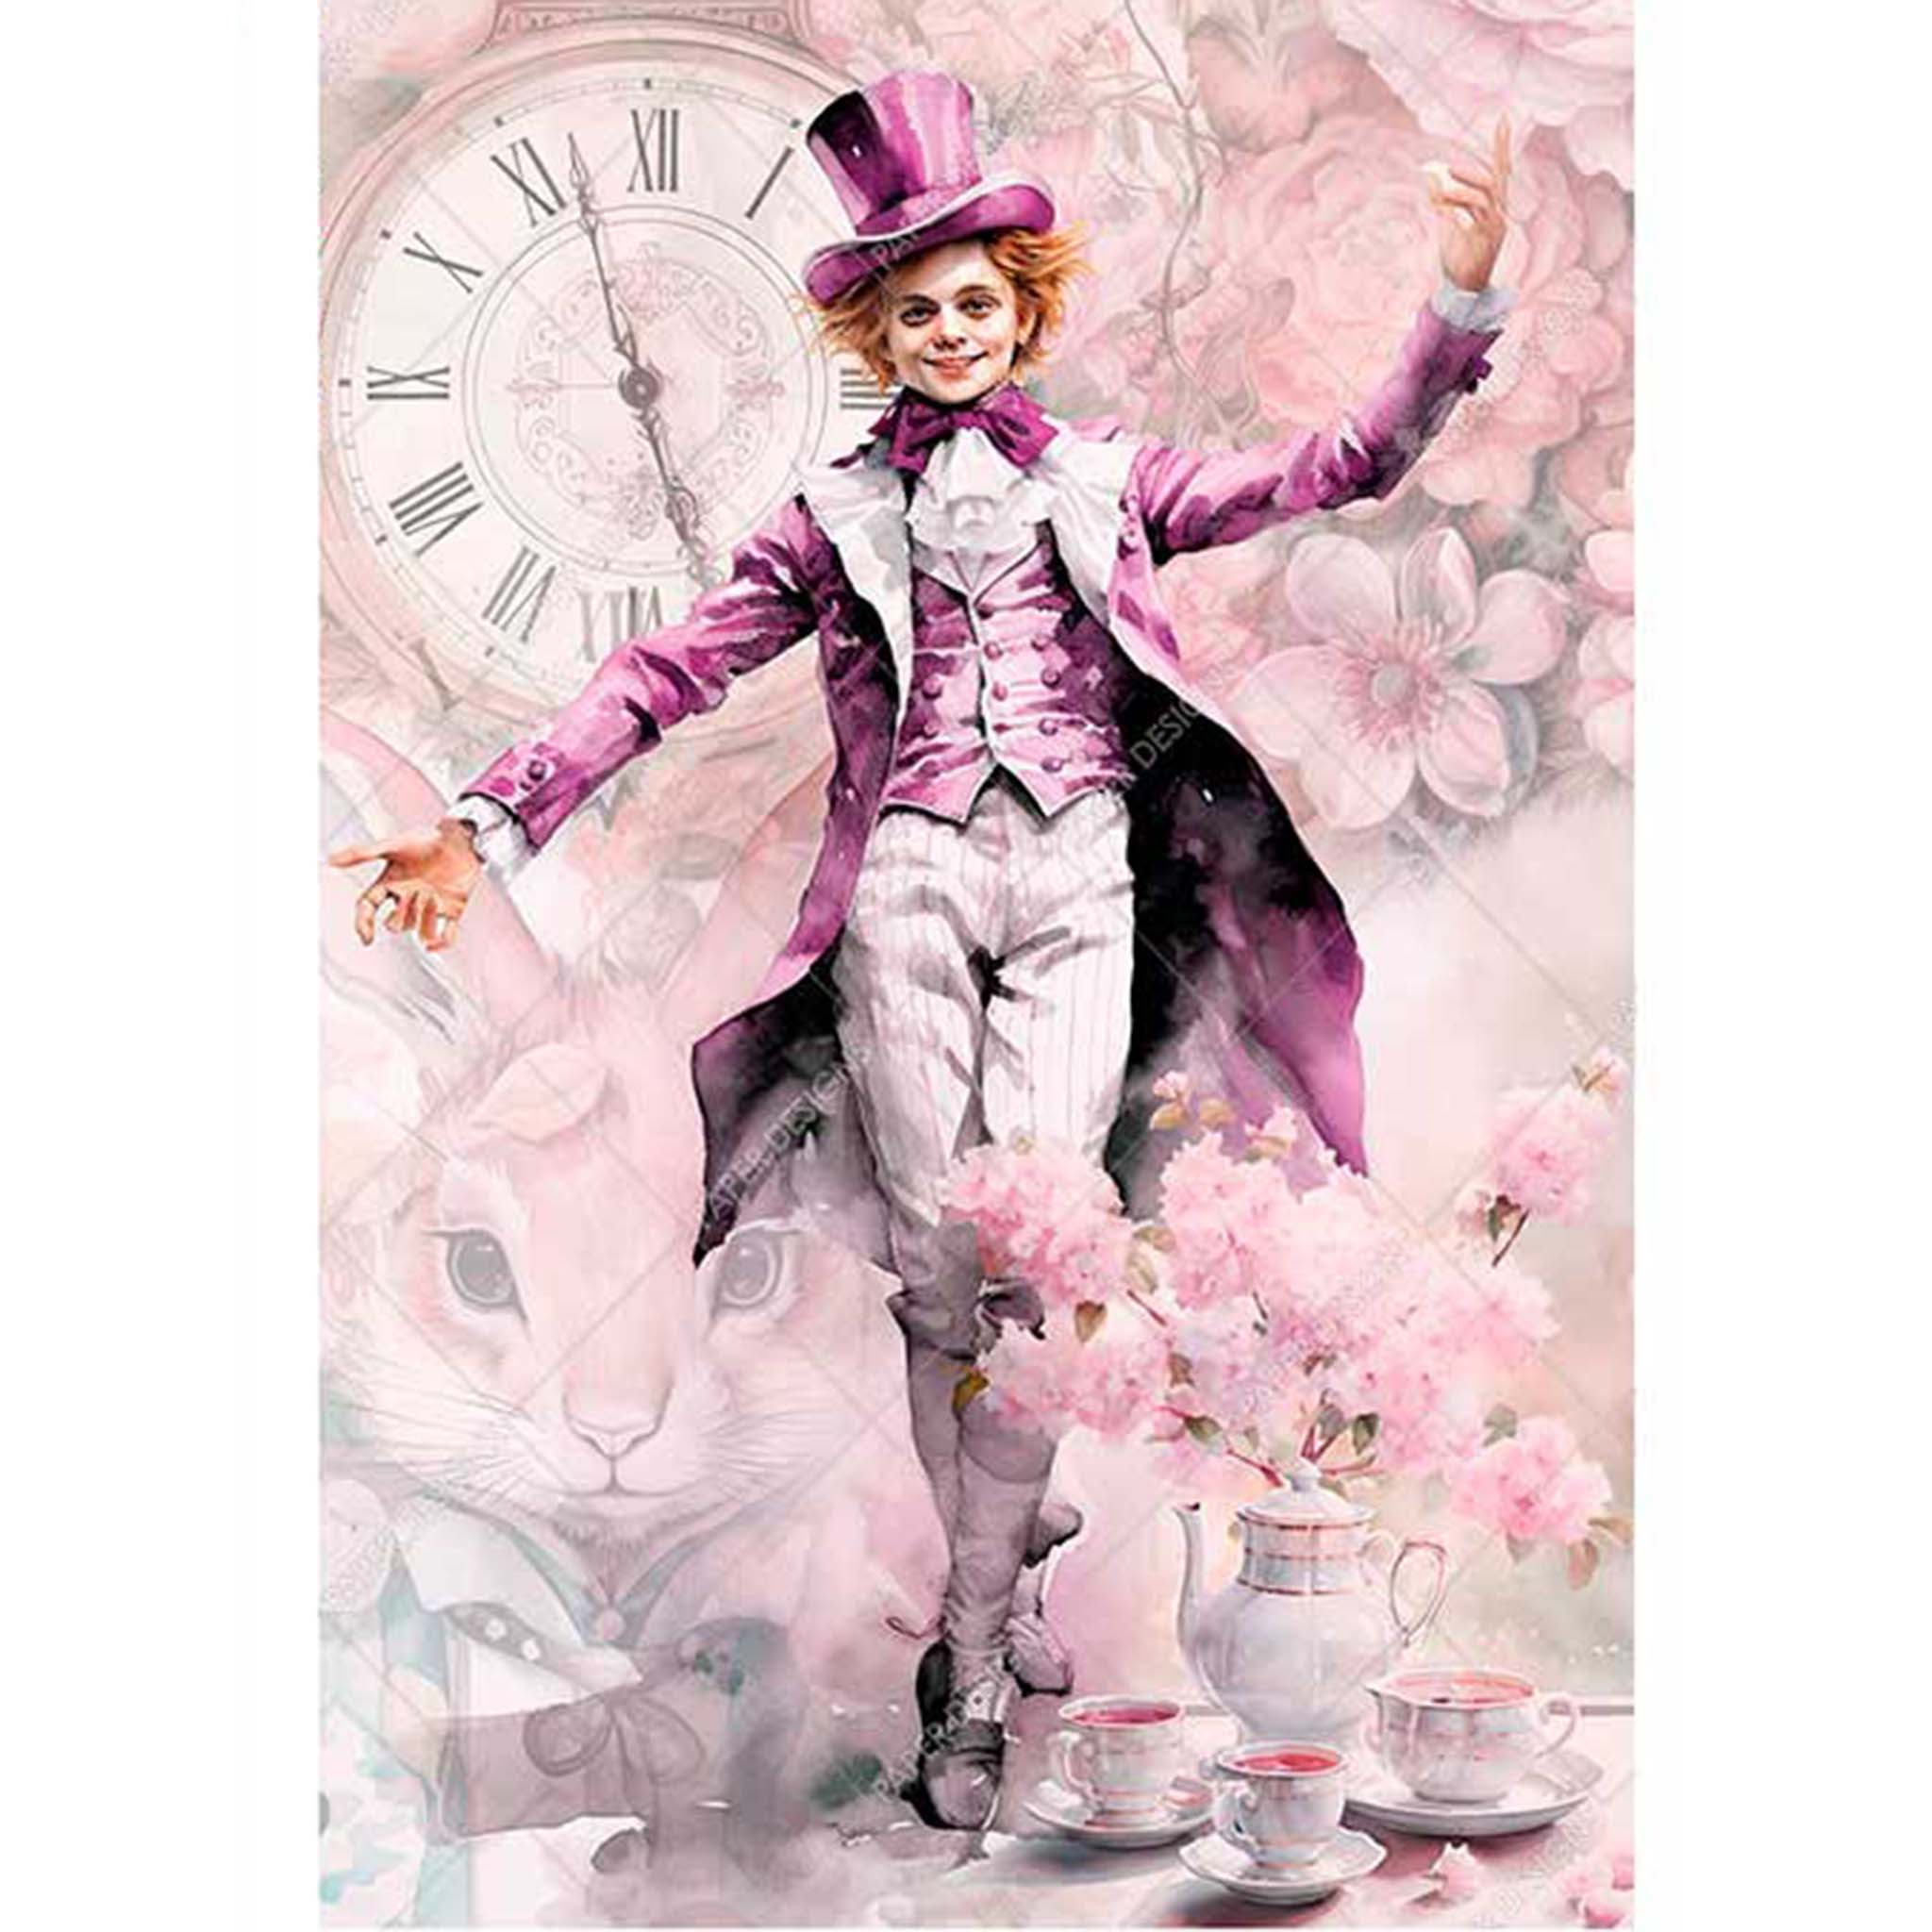 A4 rice paper design featuring The Mad Hatter and a tea set against a large clock face and rabit face in front of a pink floral background. White borders are on the sides.